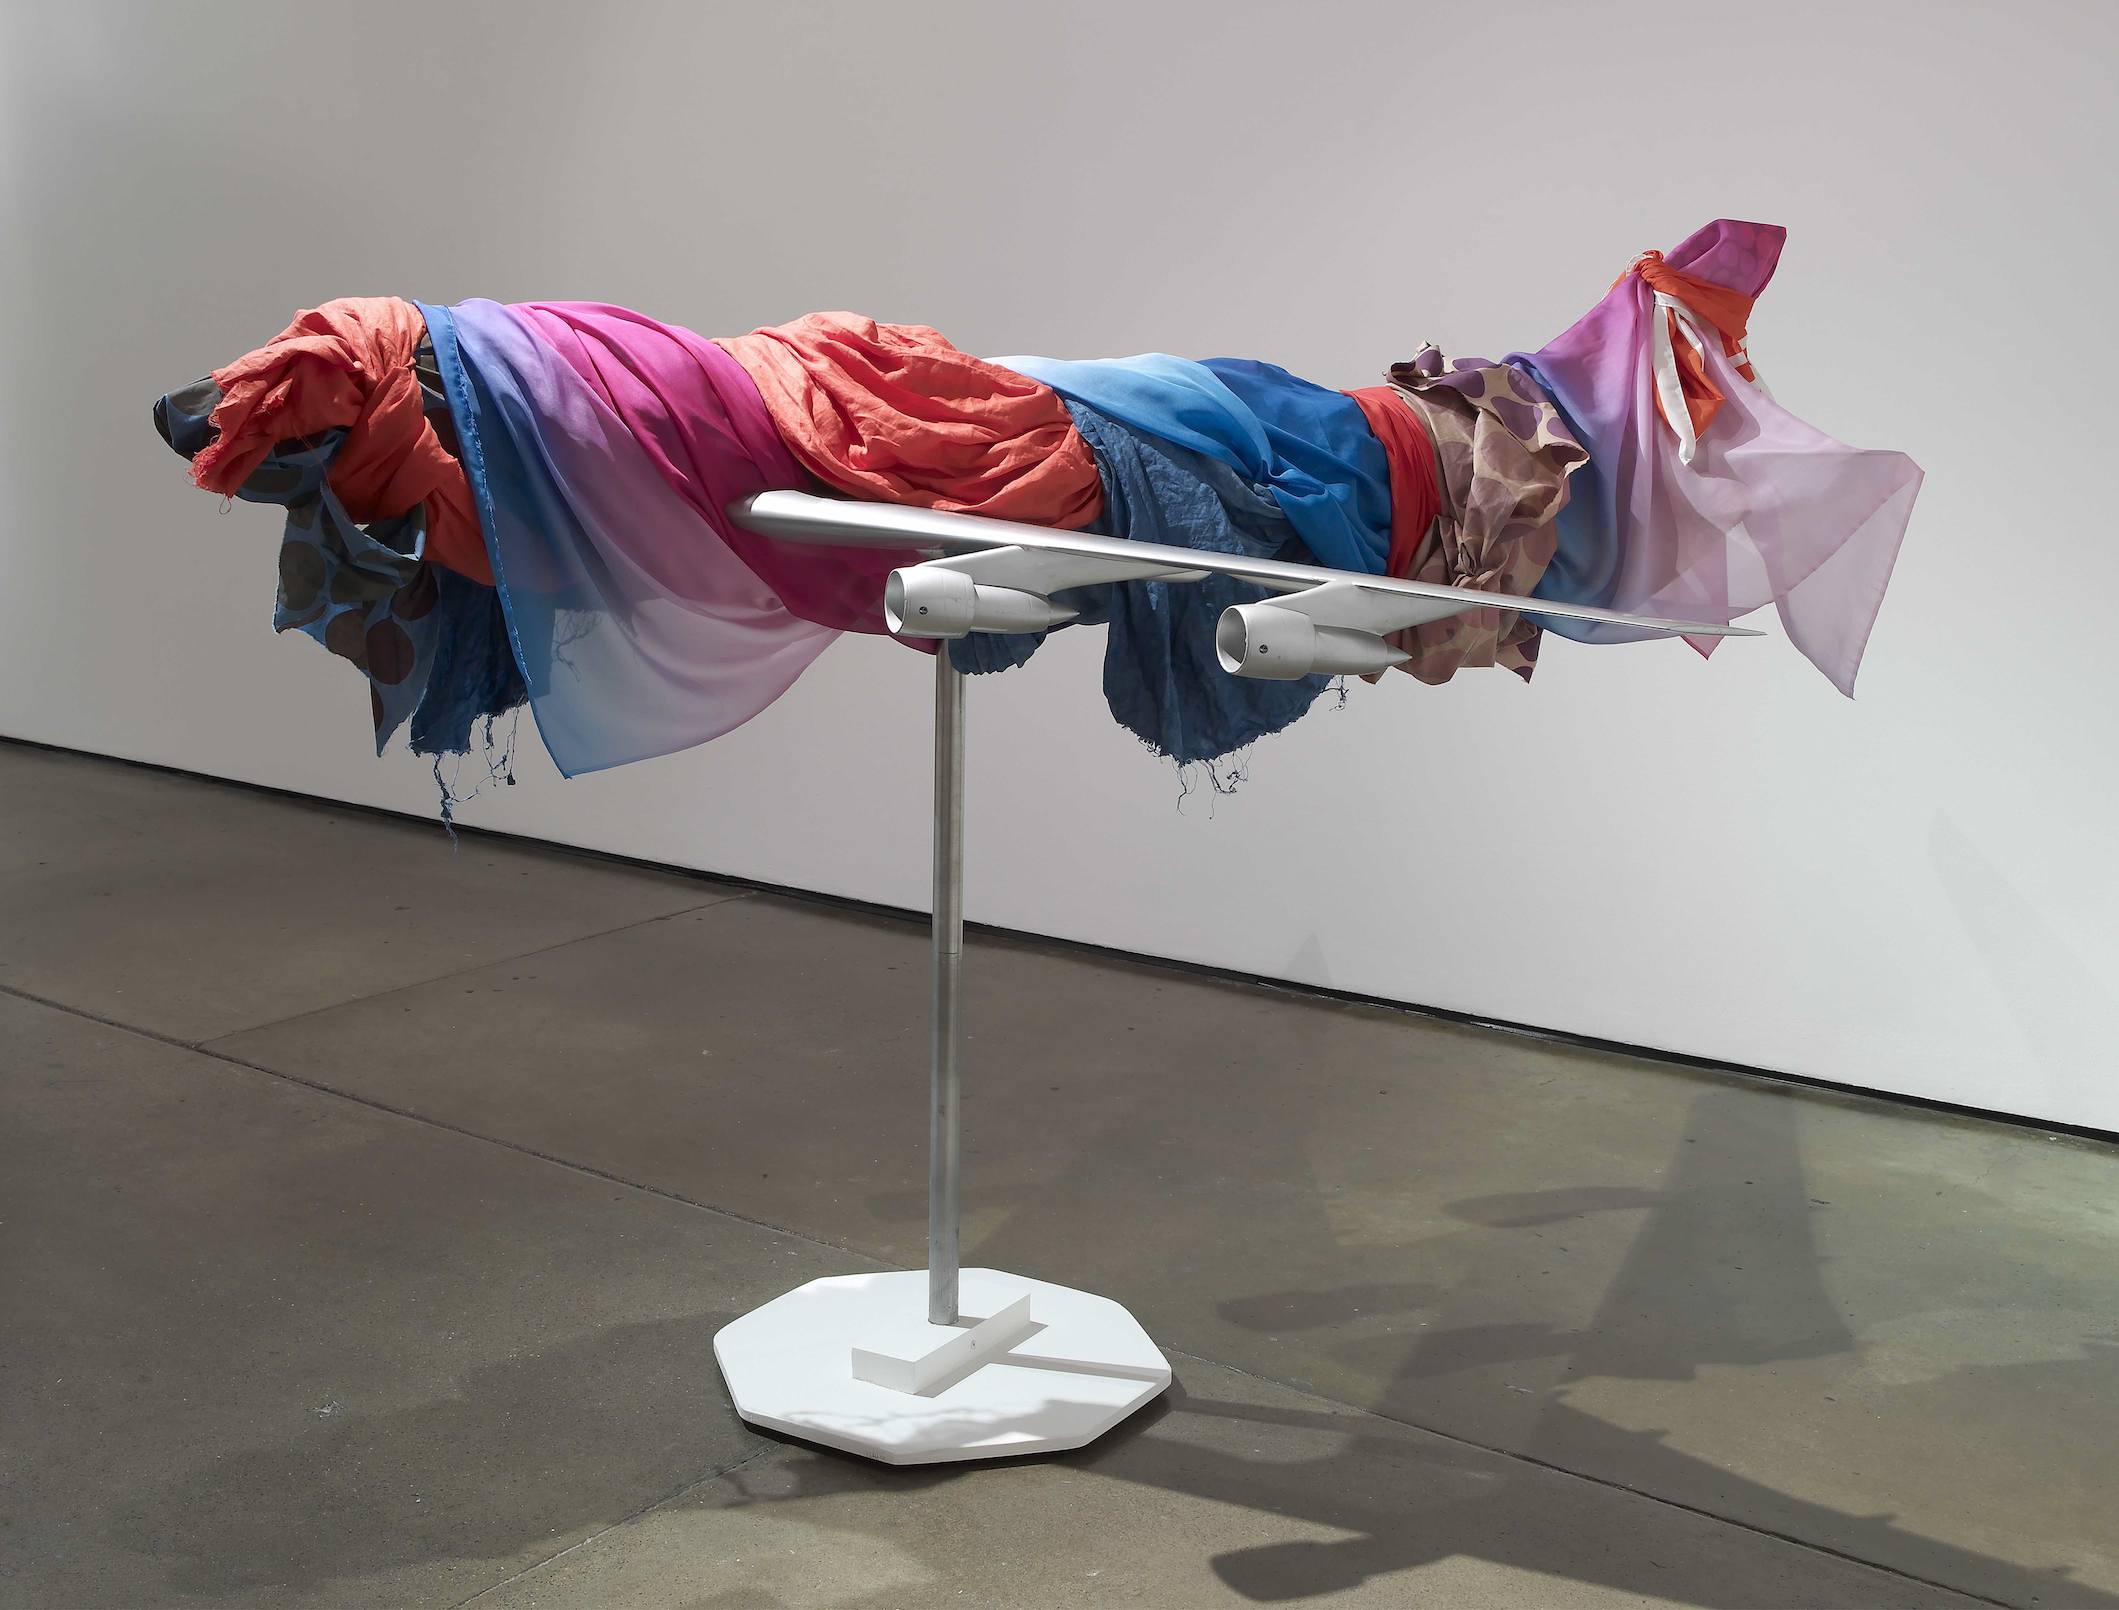      Pink Elephant   2010   Fabric, scale model airplane, stand   152.5 x 218.5 x 190.5 cm / 60.5 x 86 x 75 in  